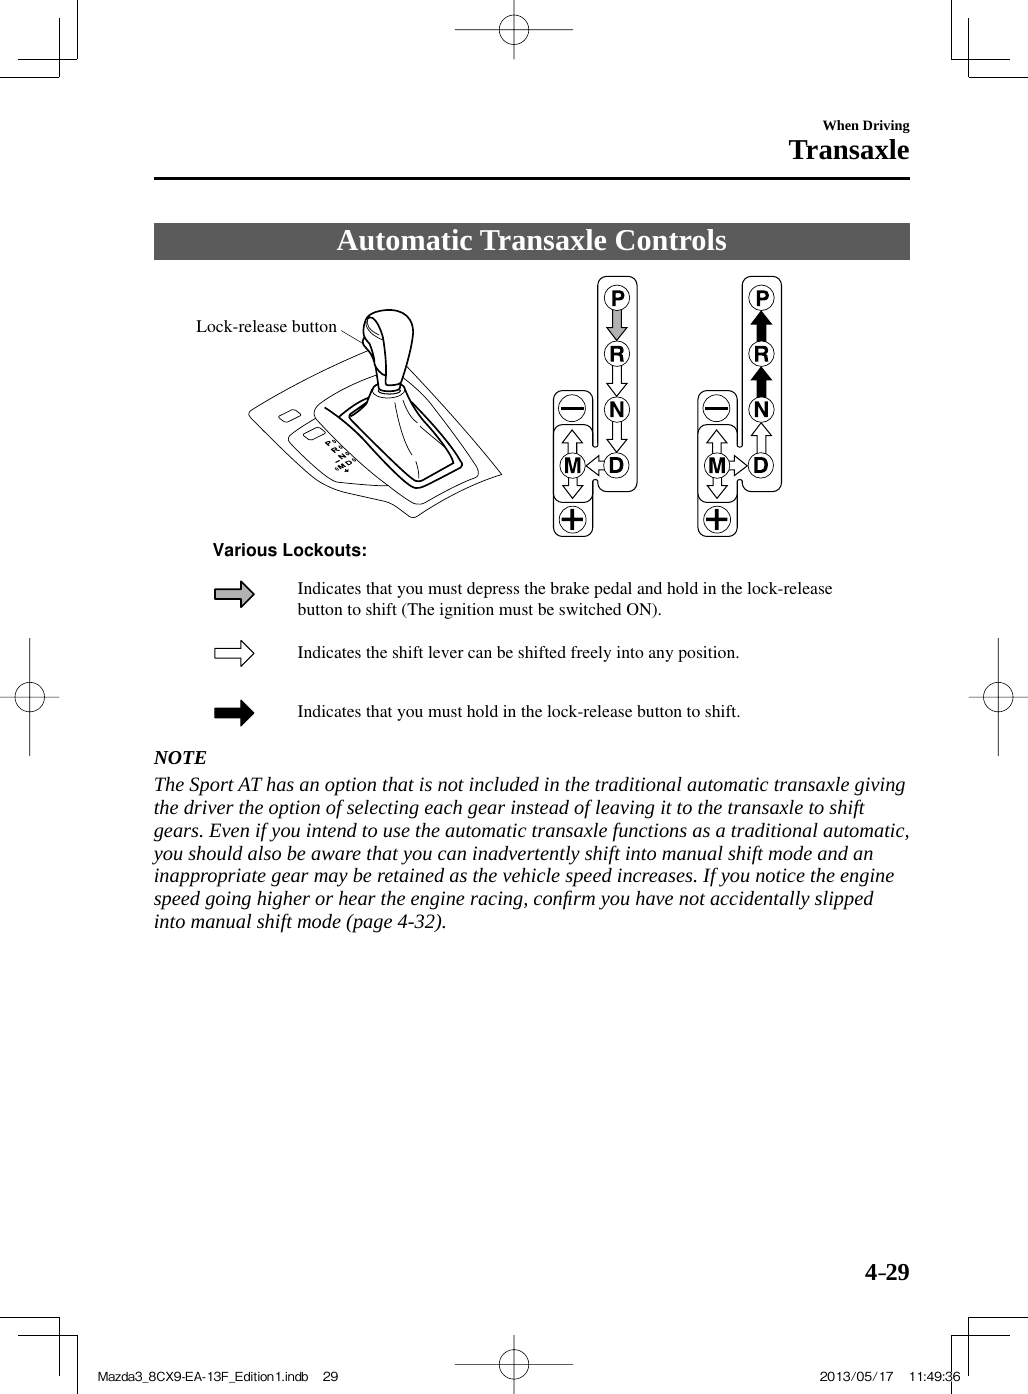 4–29When DrivingTransaxle Automatic  Transaxle  Controls   Lock-release buttonIndicates the shift lever can be shifted freely into any position.Indicates that you must hold in the lock-release button to shift.Indicates that you must depress the brake pedal and hold in the lock-release button to shift (The ignition must be switched ON). Various Lockouts:     NOTE  The Sport AT has an option that is not included in the traditional automatic transaxle giving the driver the option of selecting each gear instead of leaving it to the transaxle to shift gears. Even if you intend to use the automatic transaxle functions as a traditional automatic, you should also be aware that you can inadvertently shift into manual shift mode and an inappropriate gear may be retained as the vehicle speed increases. If you notice the engine speed going higher or hear the engine racing, conﬁ rm you have not accidentally slipped into manual shift mode (page  4-32 ).   Mazda3_8CX9-EA-13F_Edition1.indb   29Mazda3_8CX9-EA-13F_Edition1.indb   29 2013/05/17   11:49:362013/05/17   11:49:36